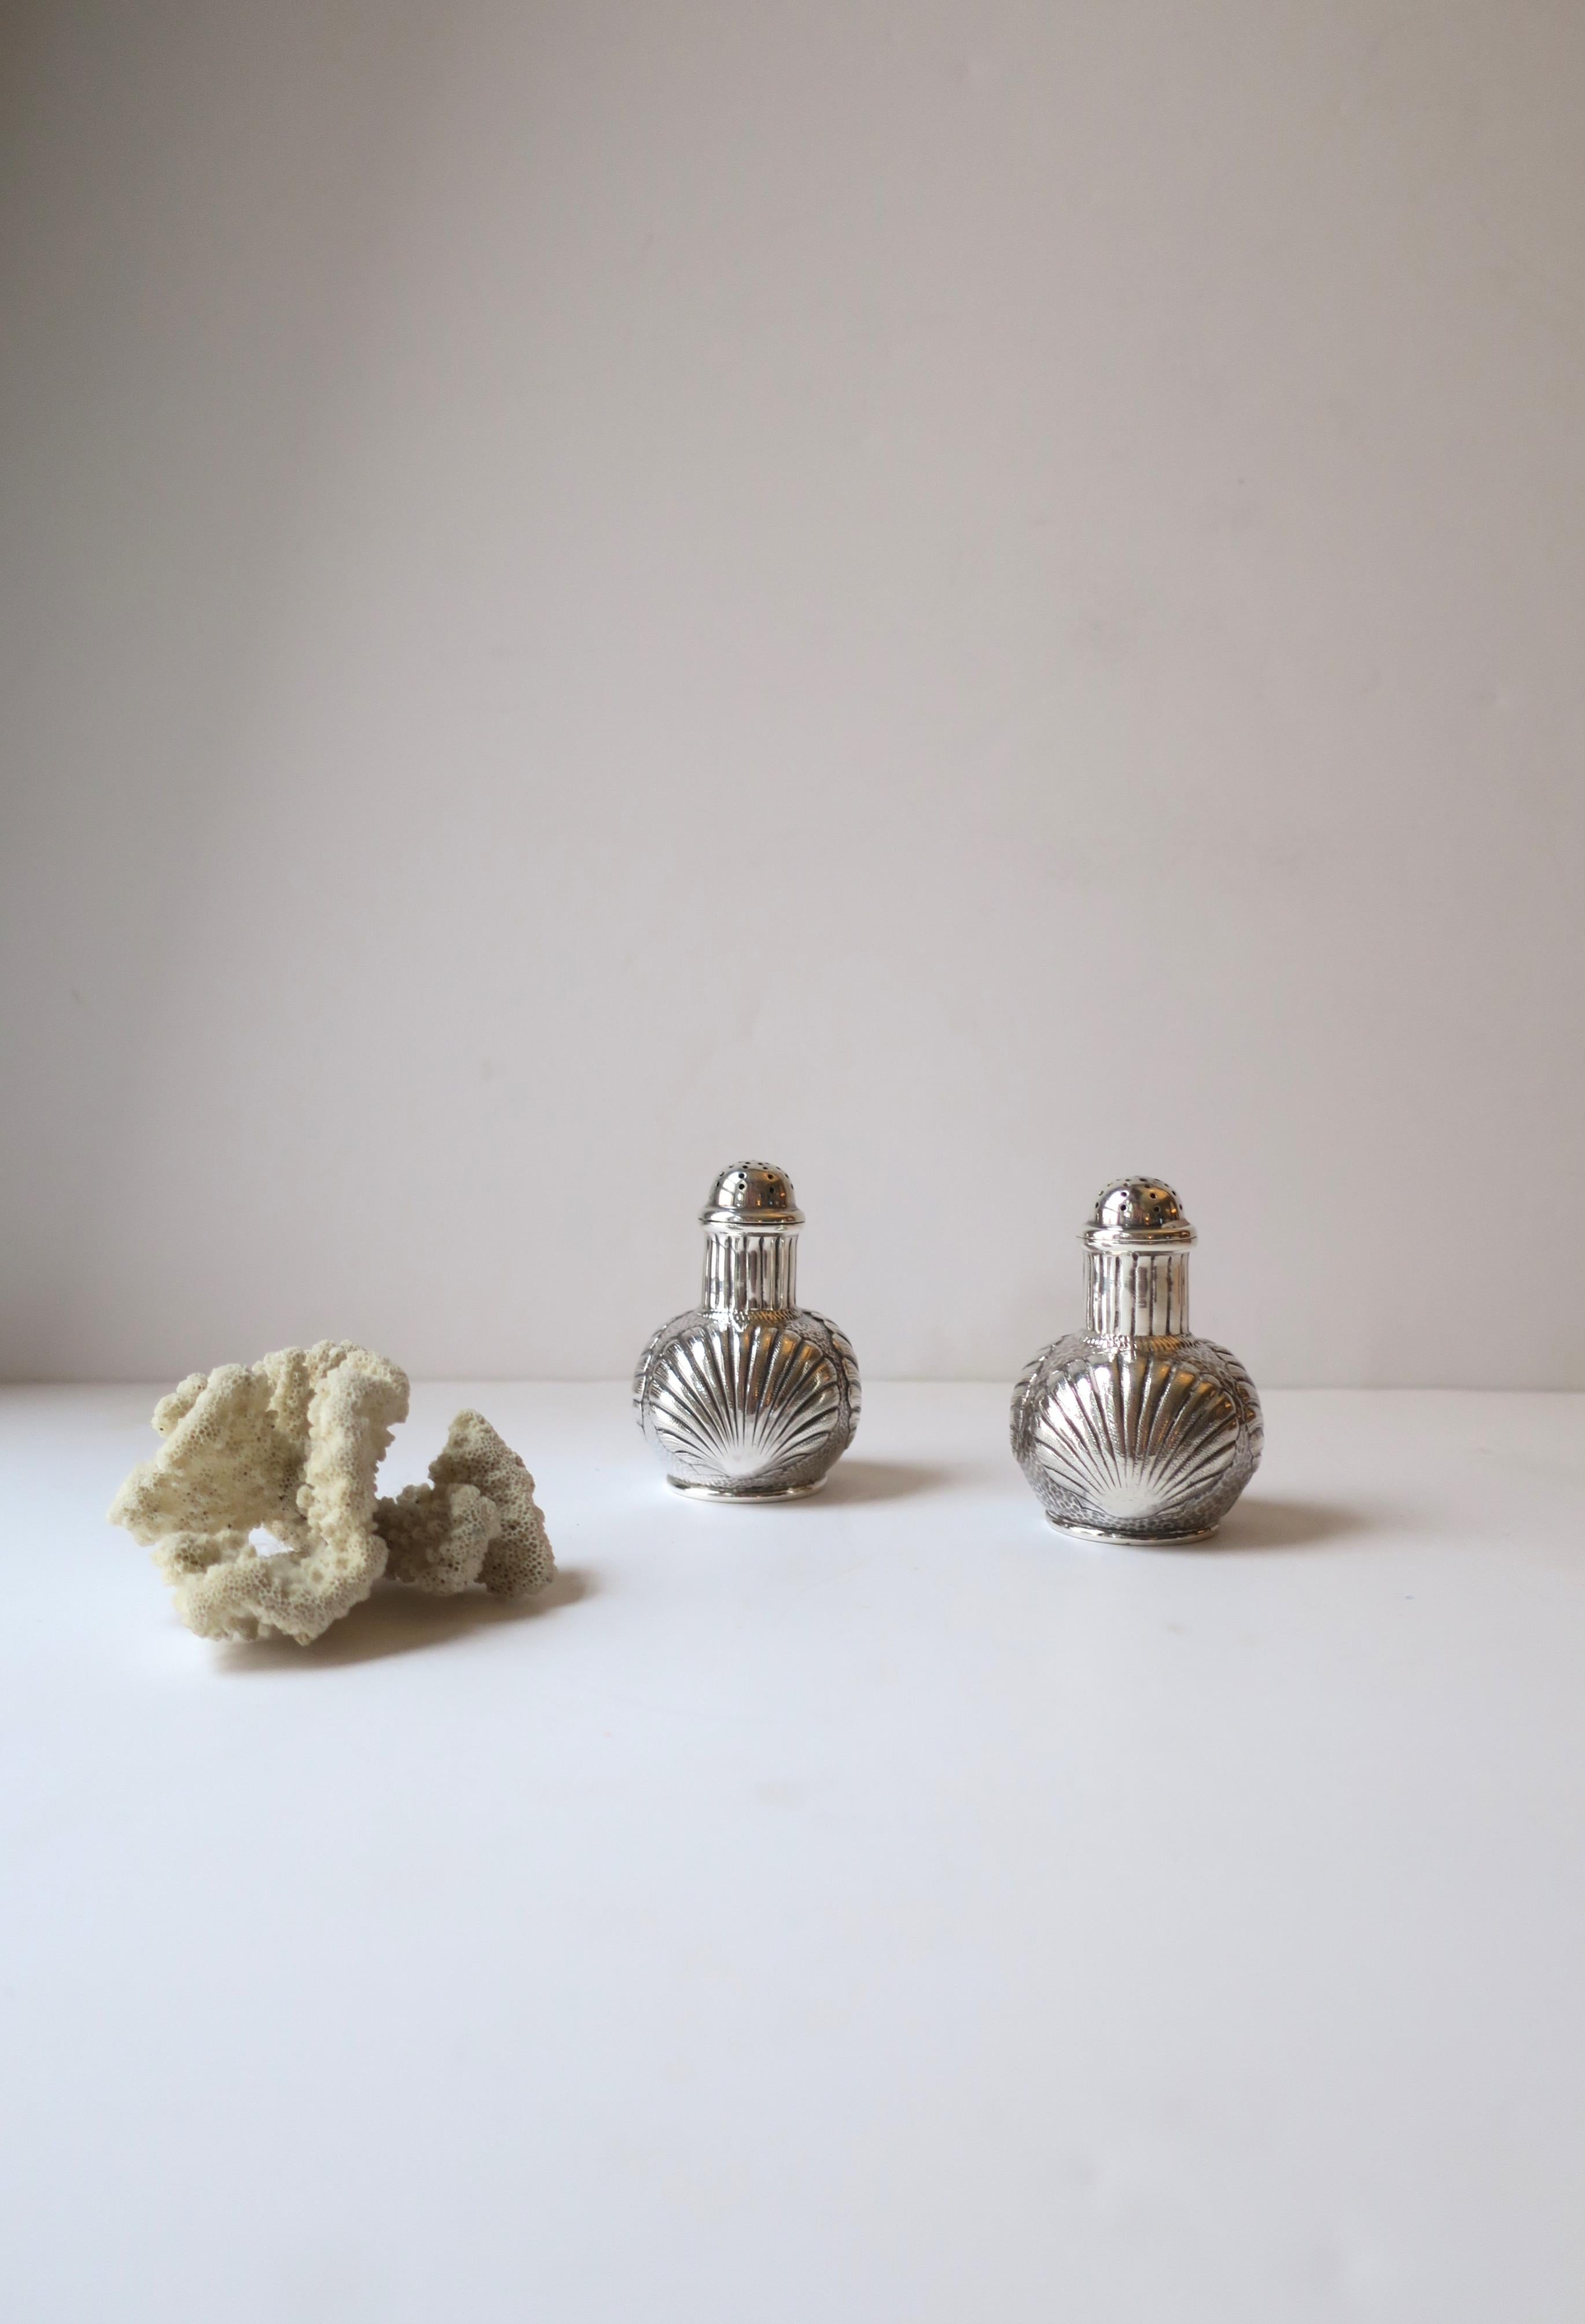 Sterling Silver Salt & Pepper Shakers Scallop Seashell Design by Caldwell, Pair In Good Condition For Sale In New York, NY